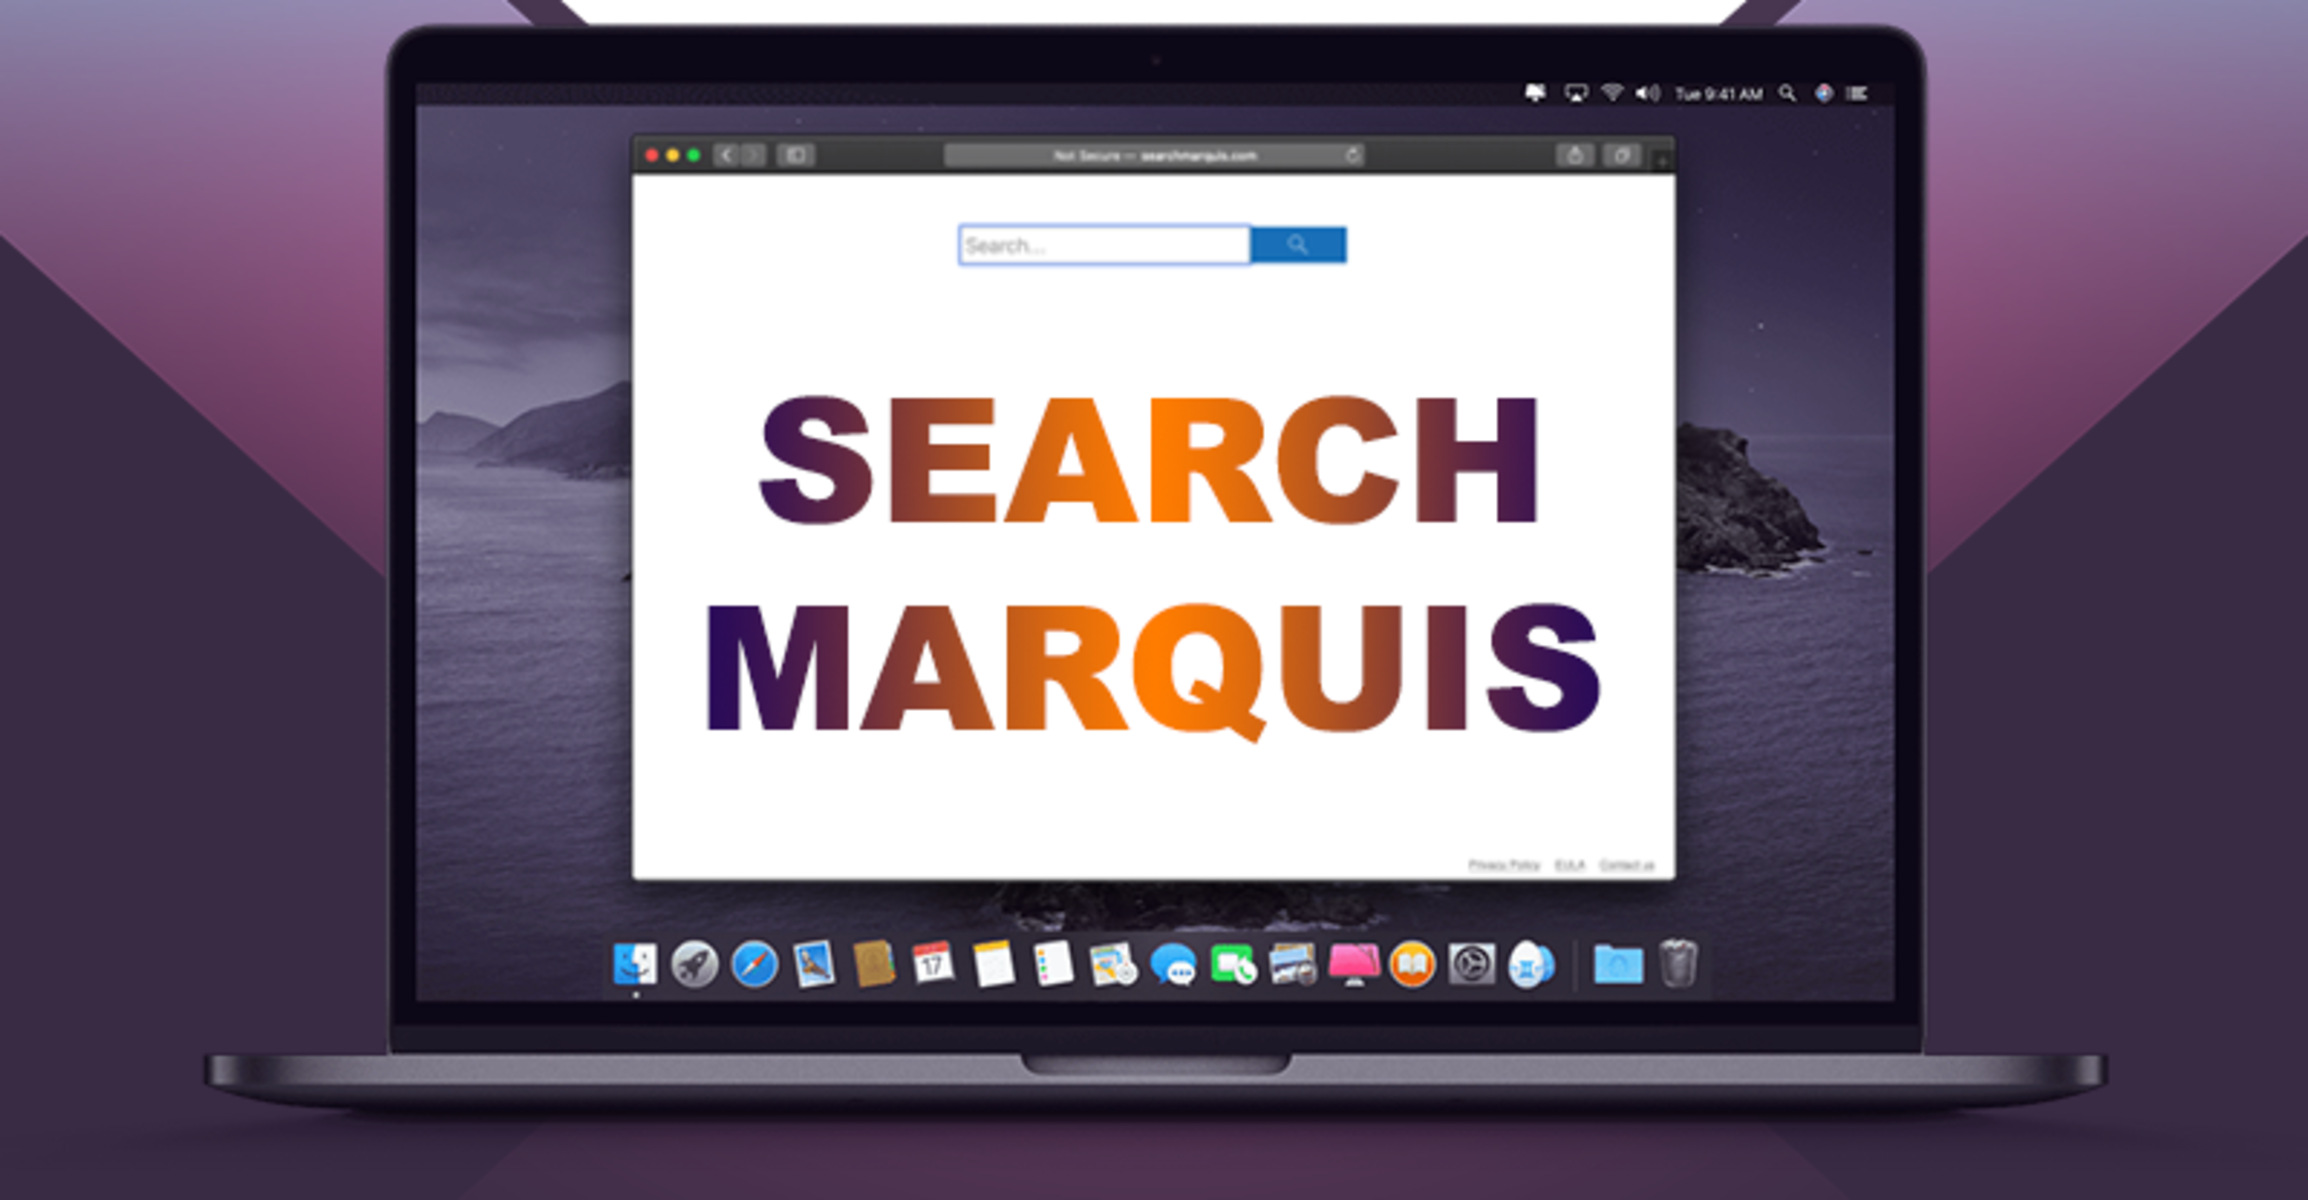 How To Get Rid Of Search Marquis On Google Chrome